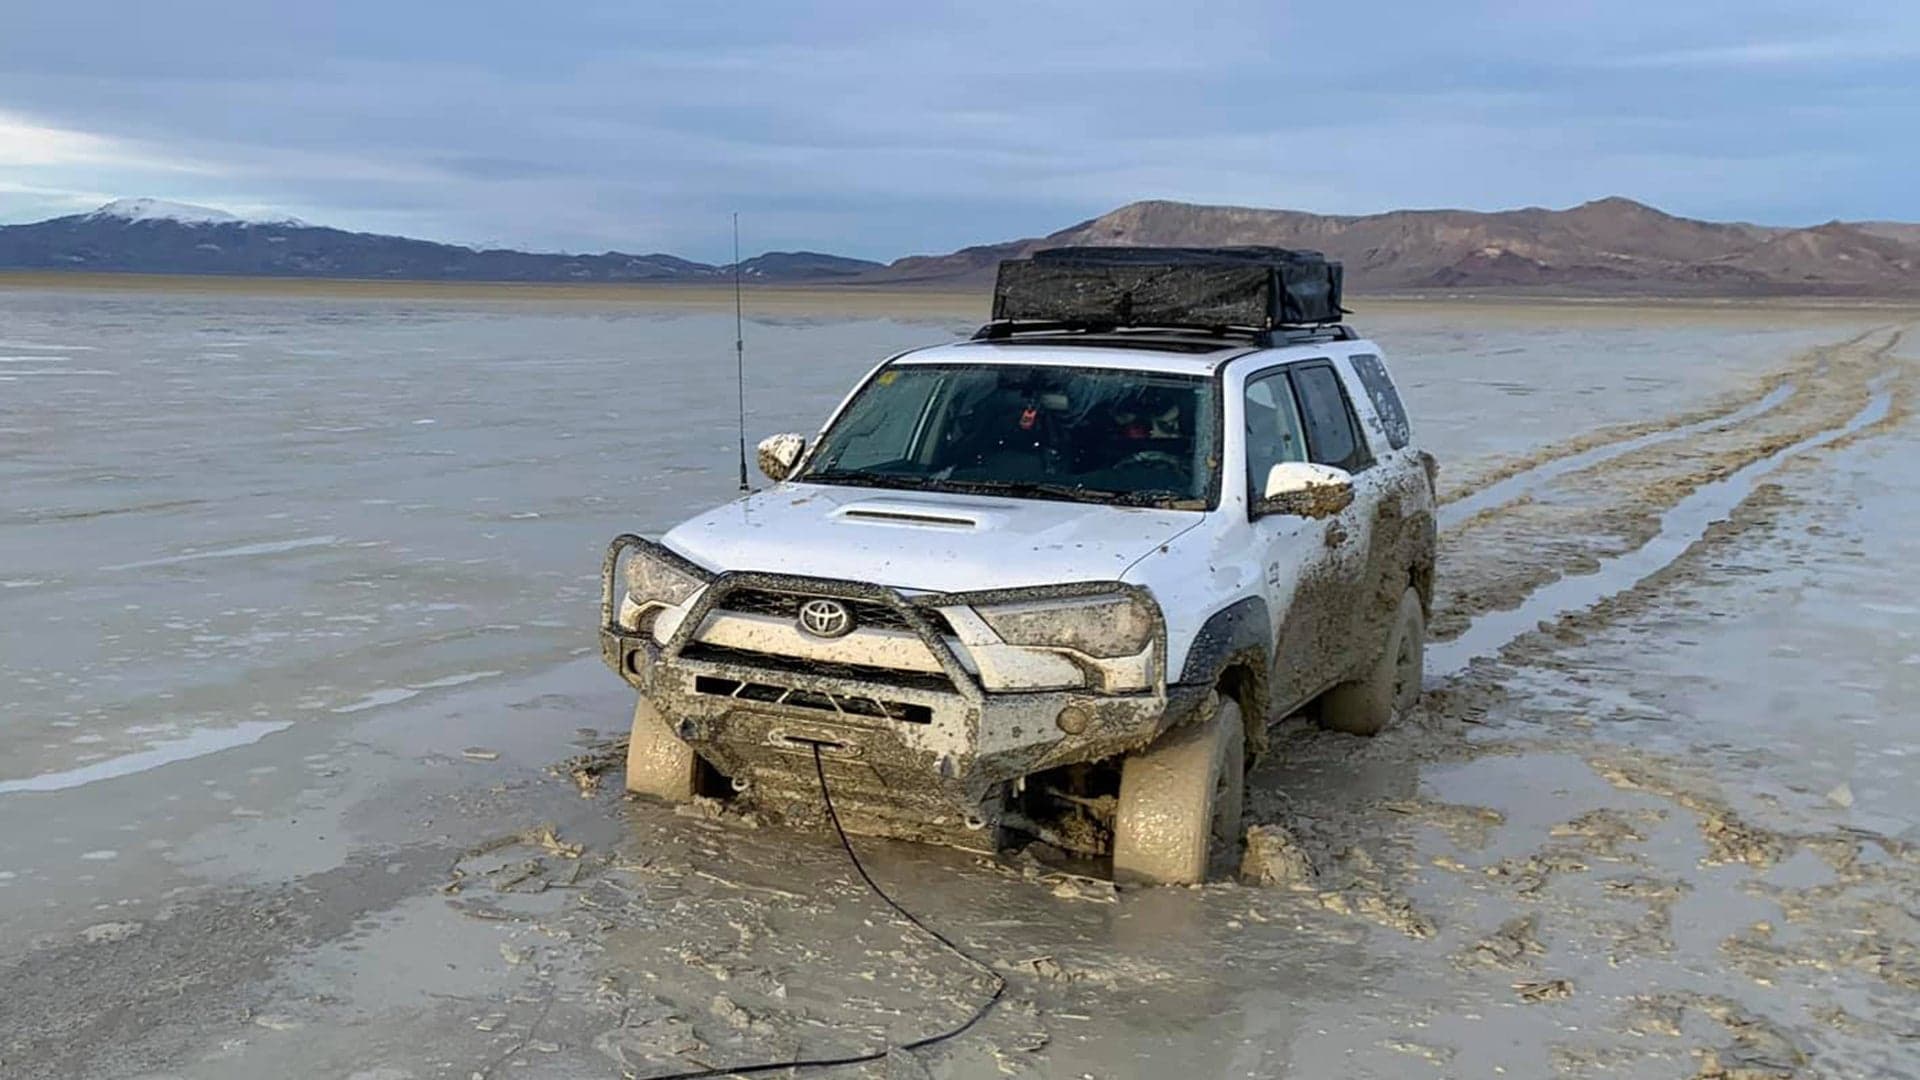 There’s an Incredible Effort to Save a Stuck Toyota 4Runner Unfolding on Facebook